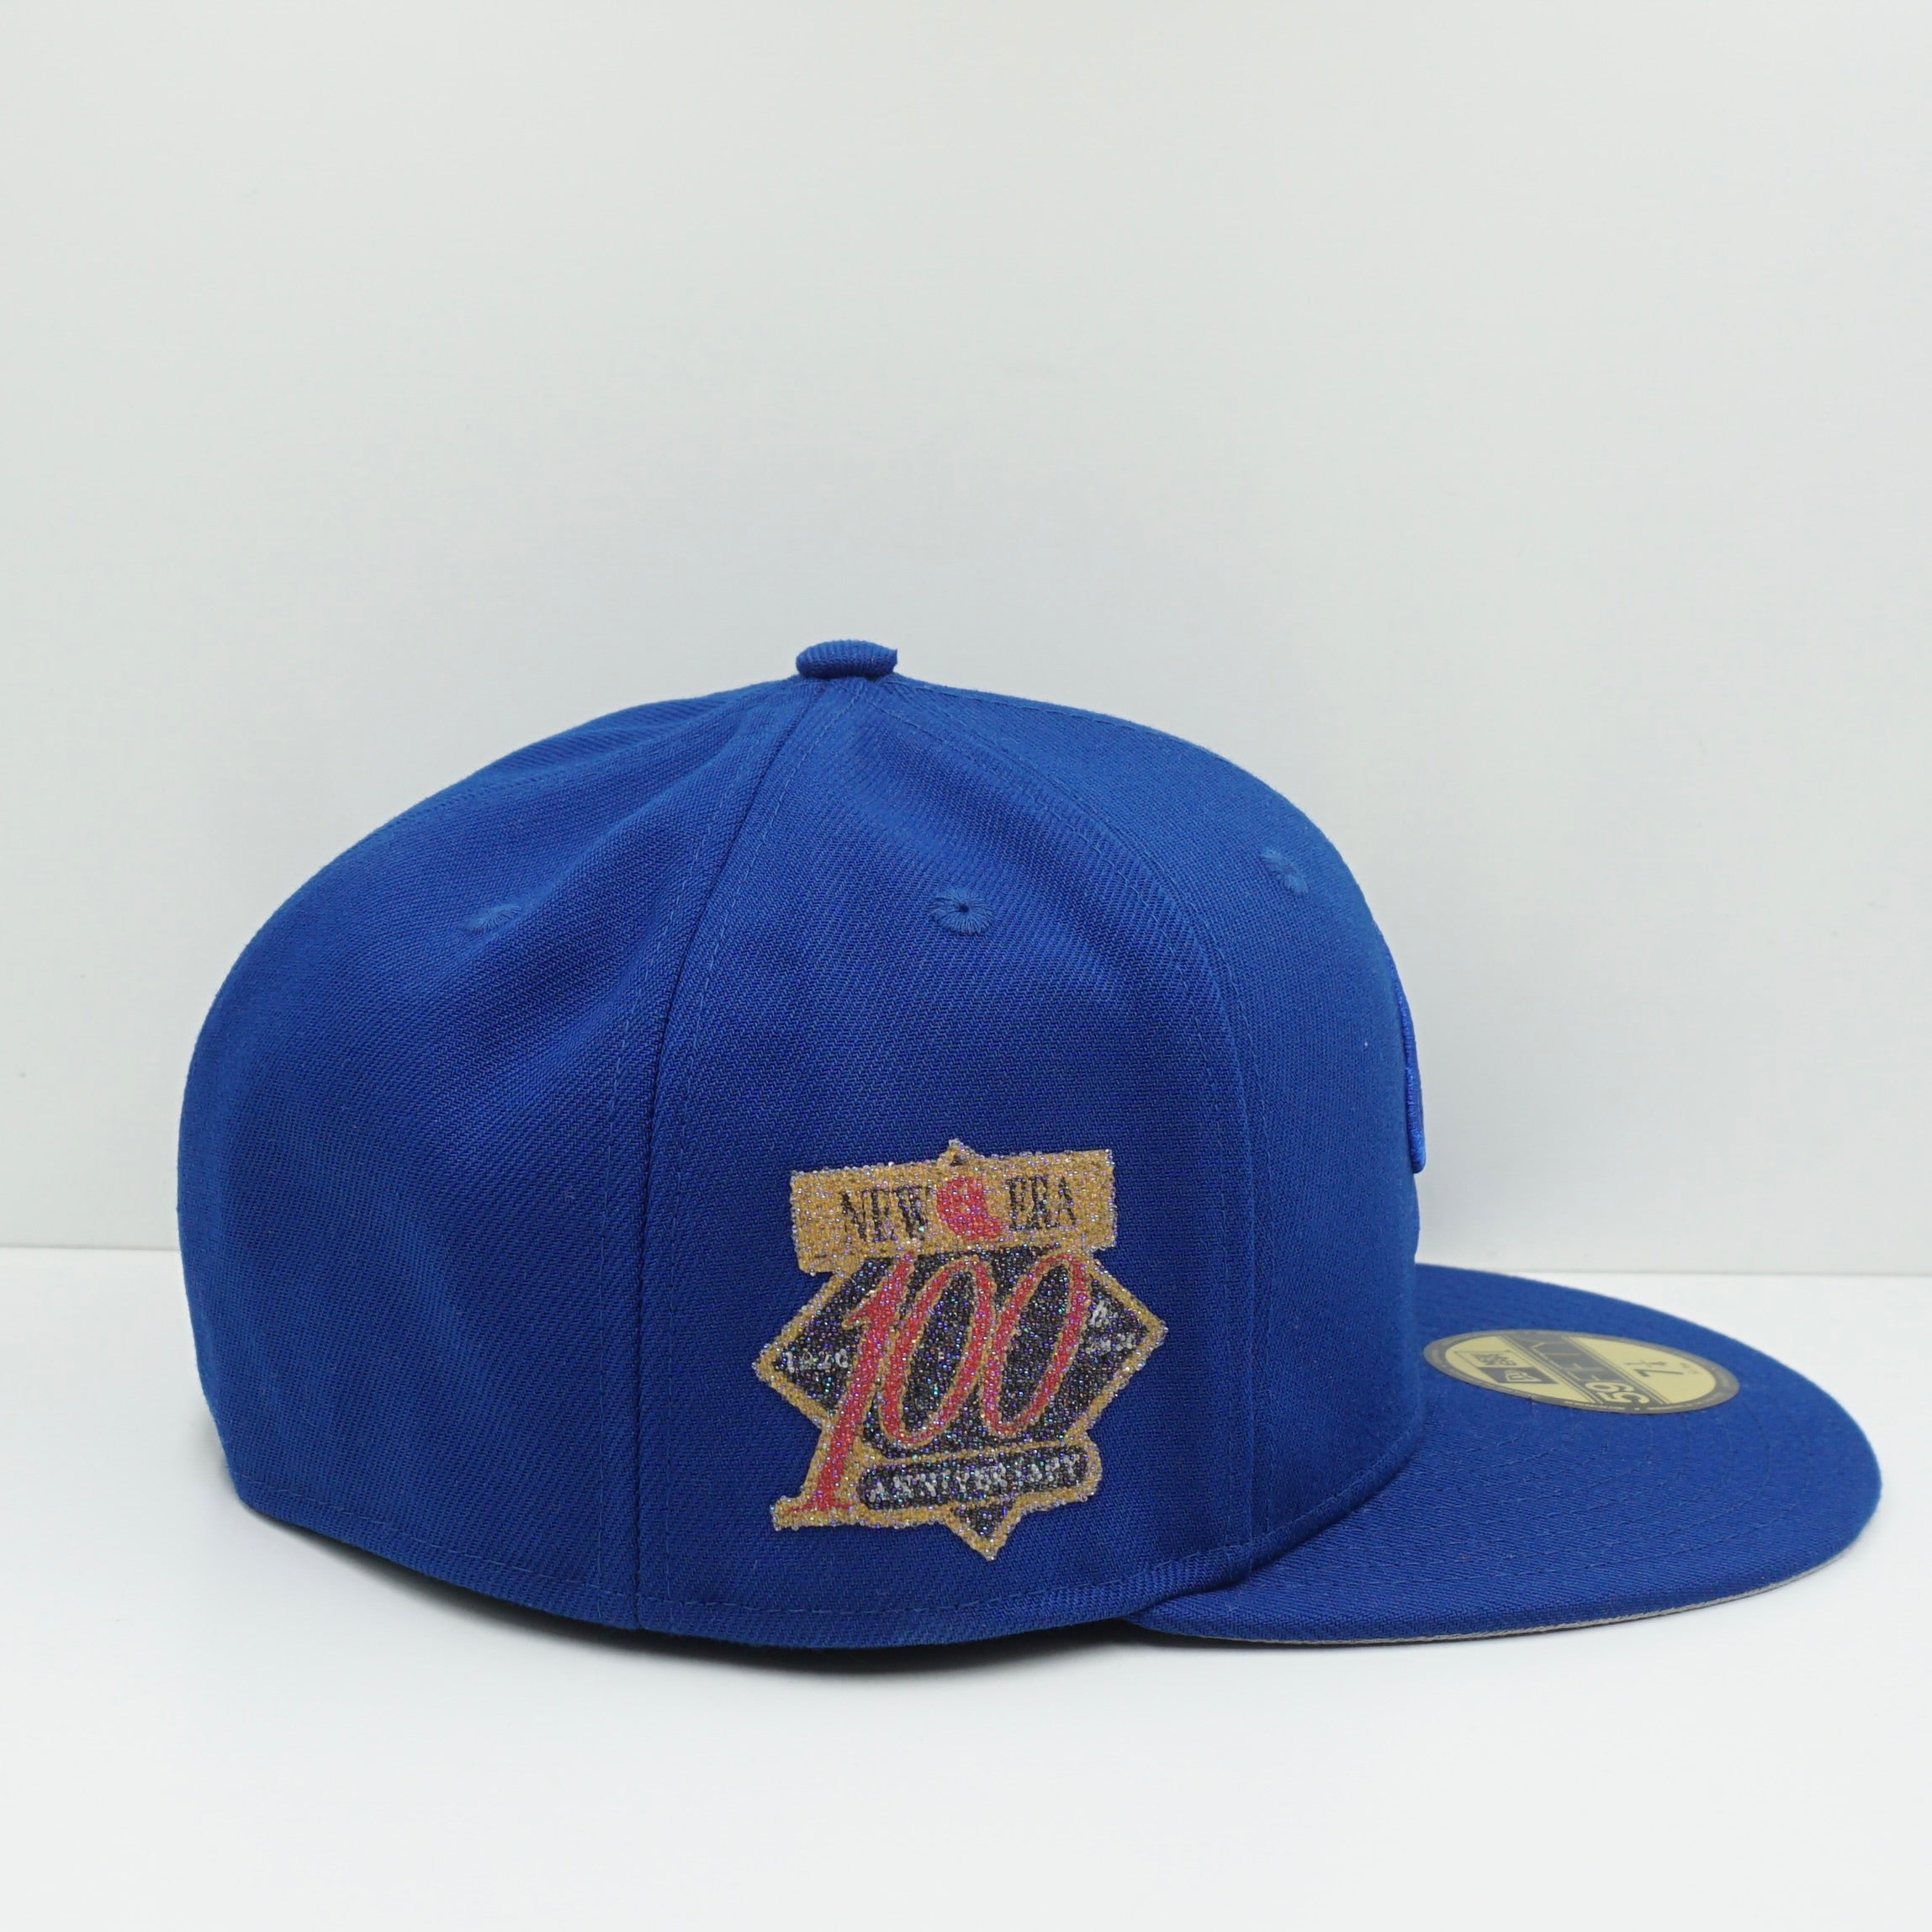 New Era 100th Anniversary Blue Fitted Cap